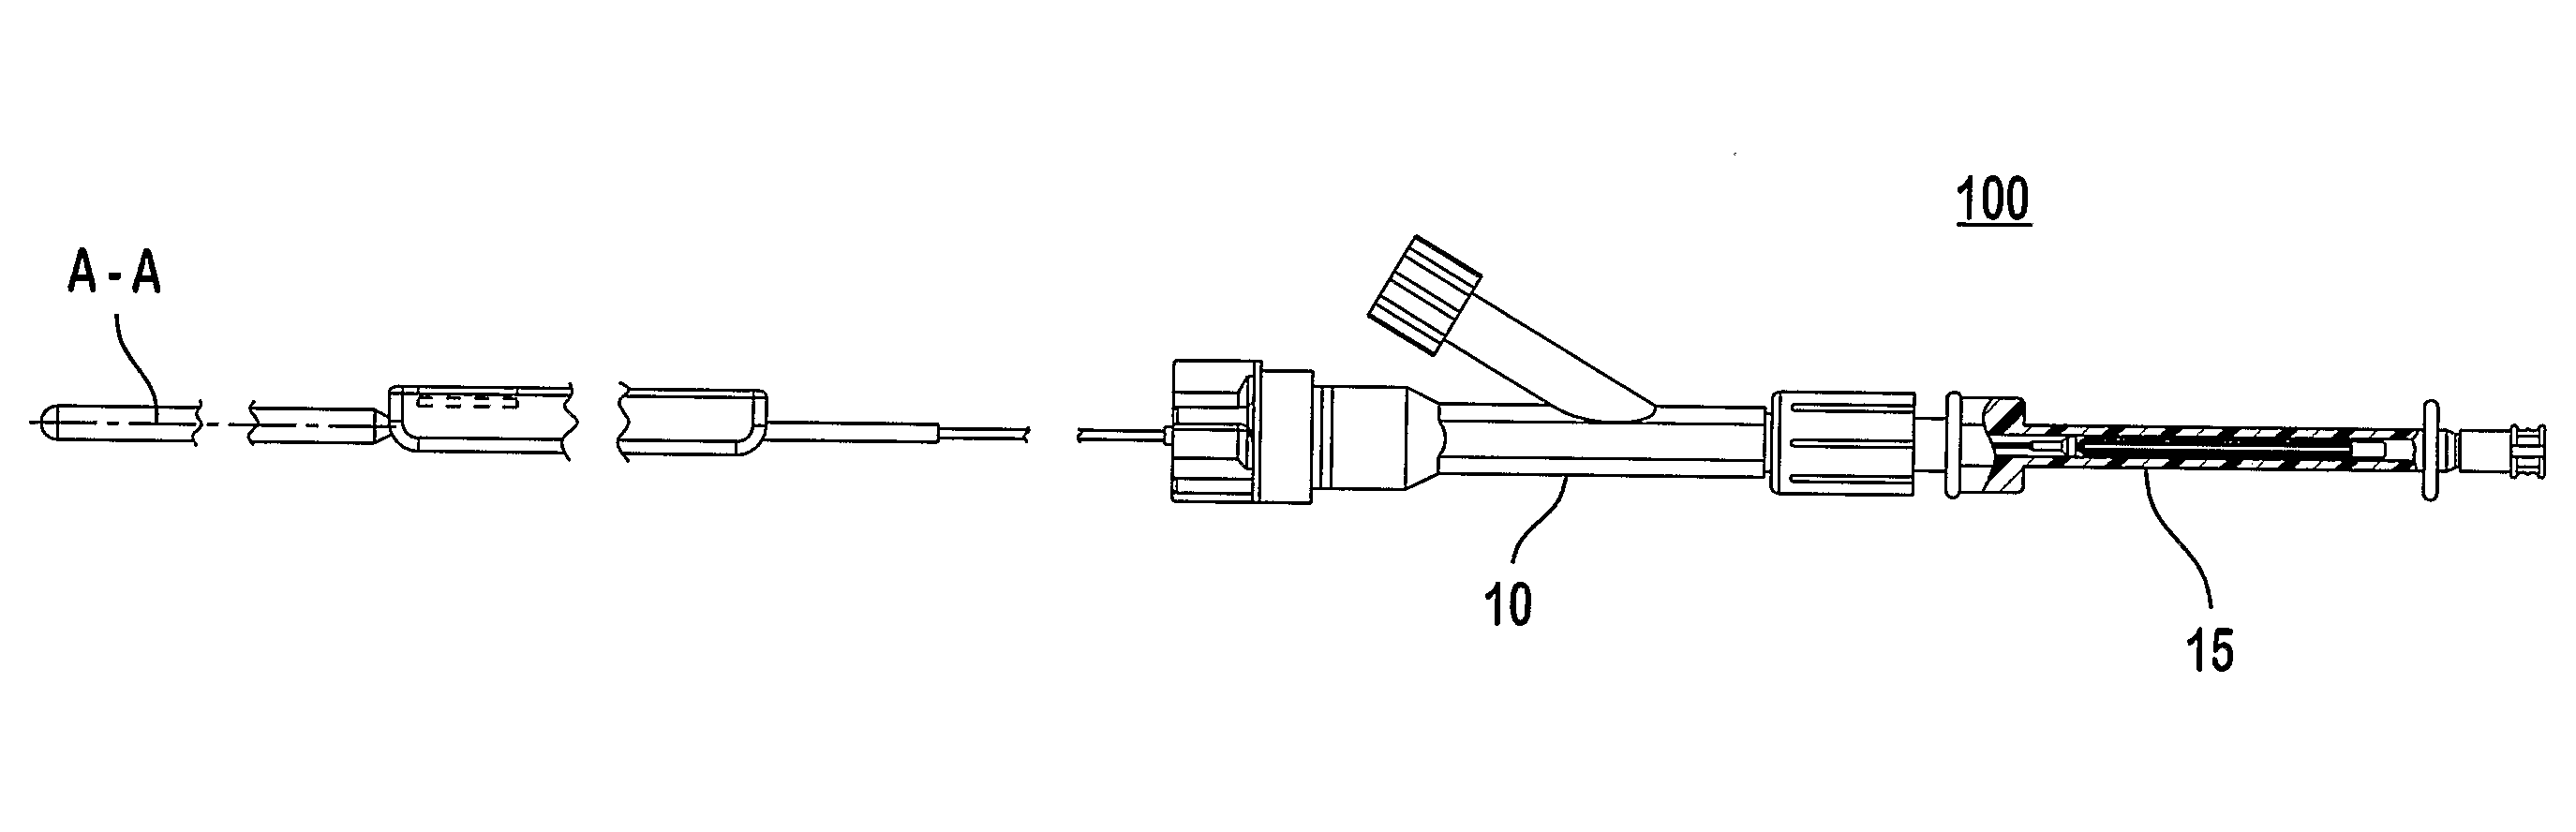 Embolus blood clot filter and delivery system